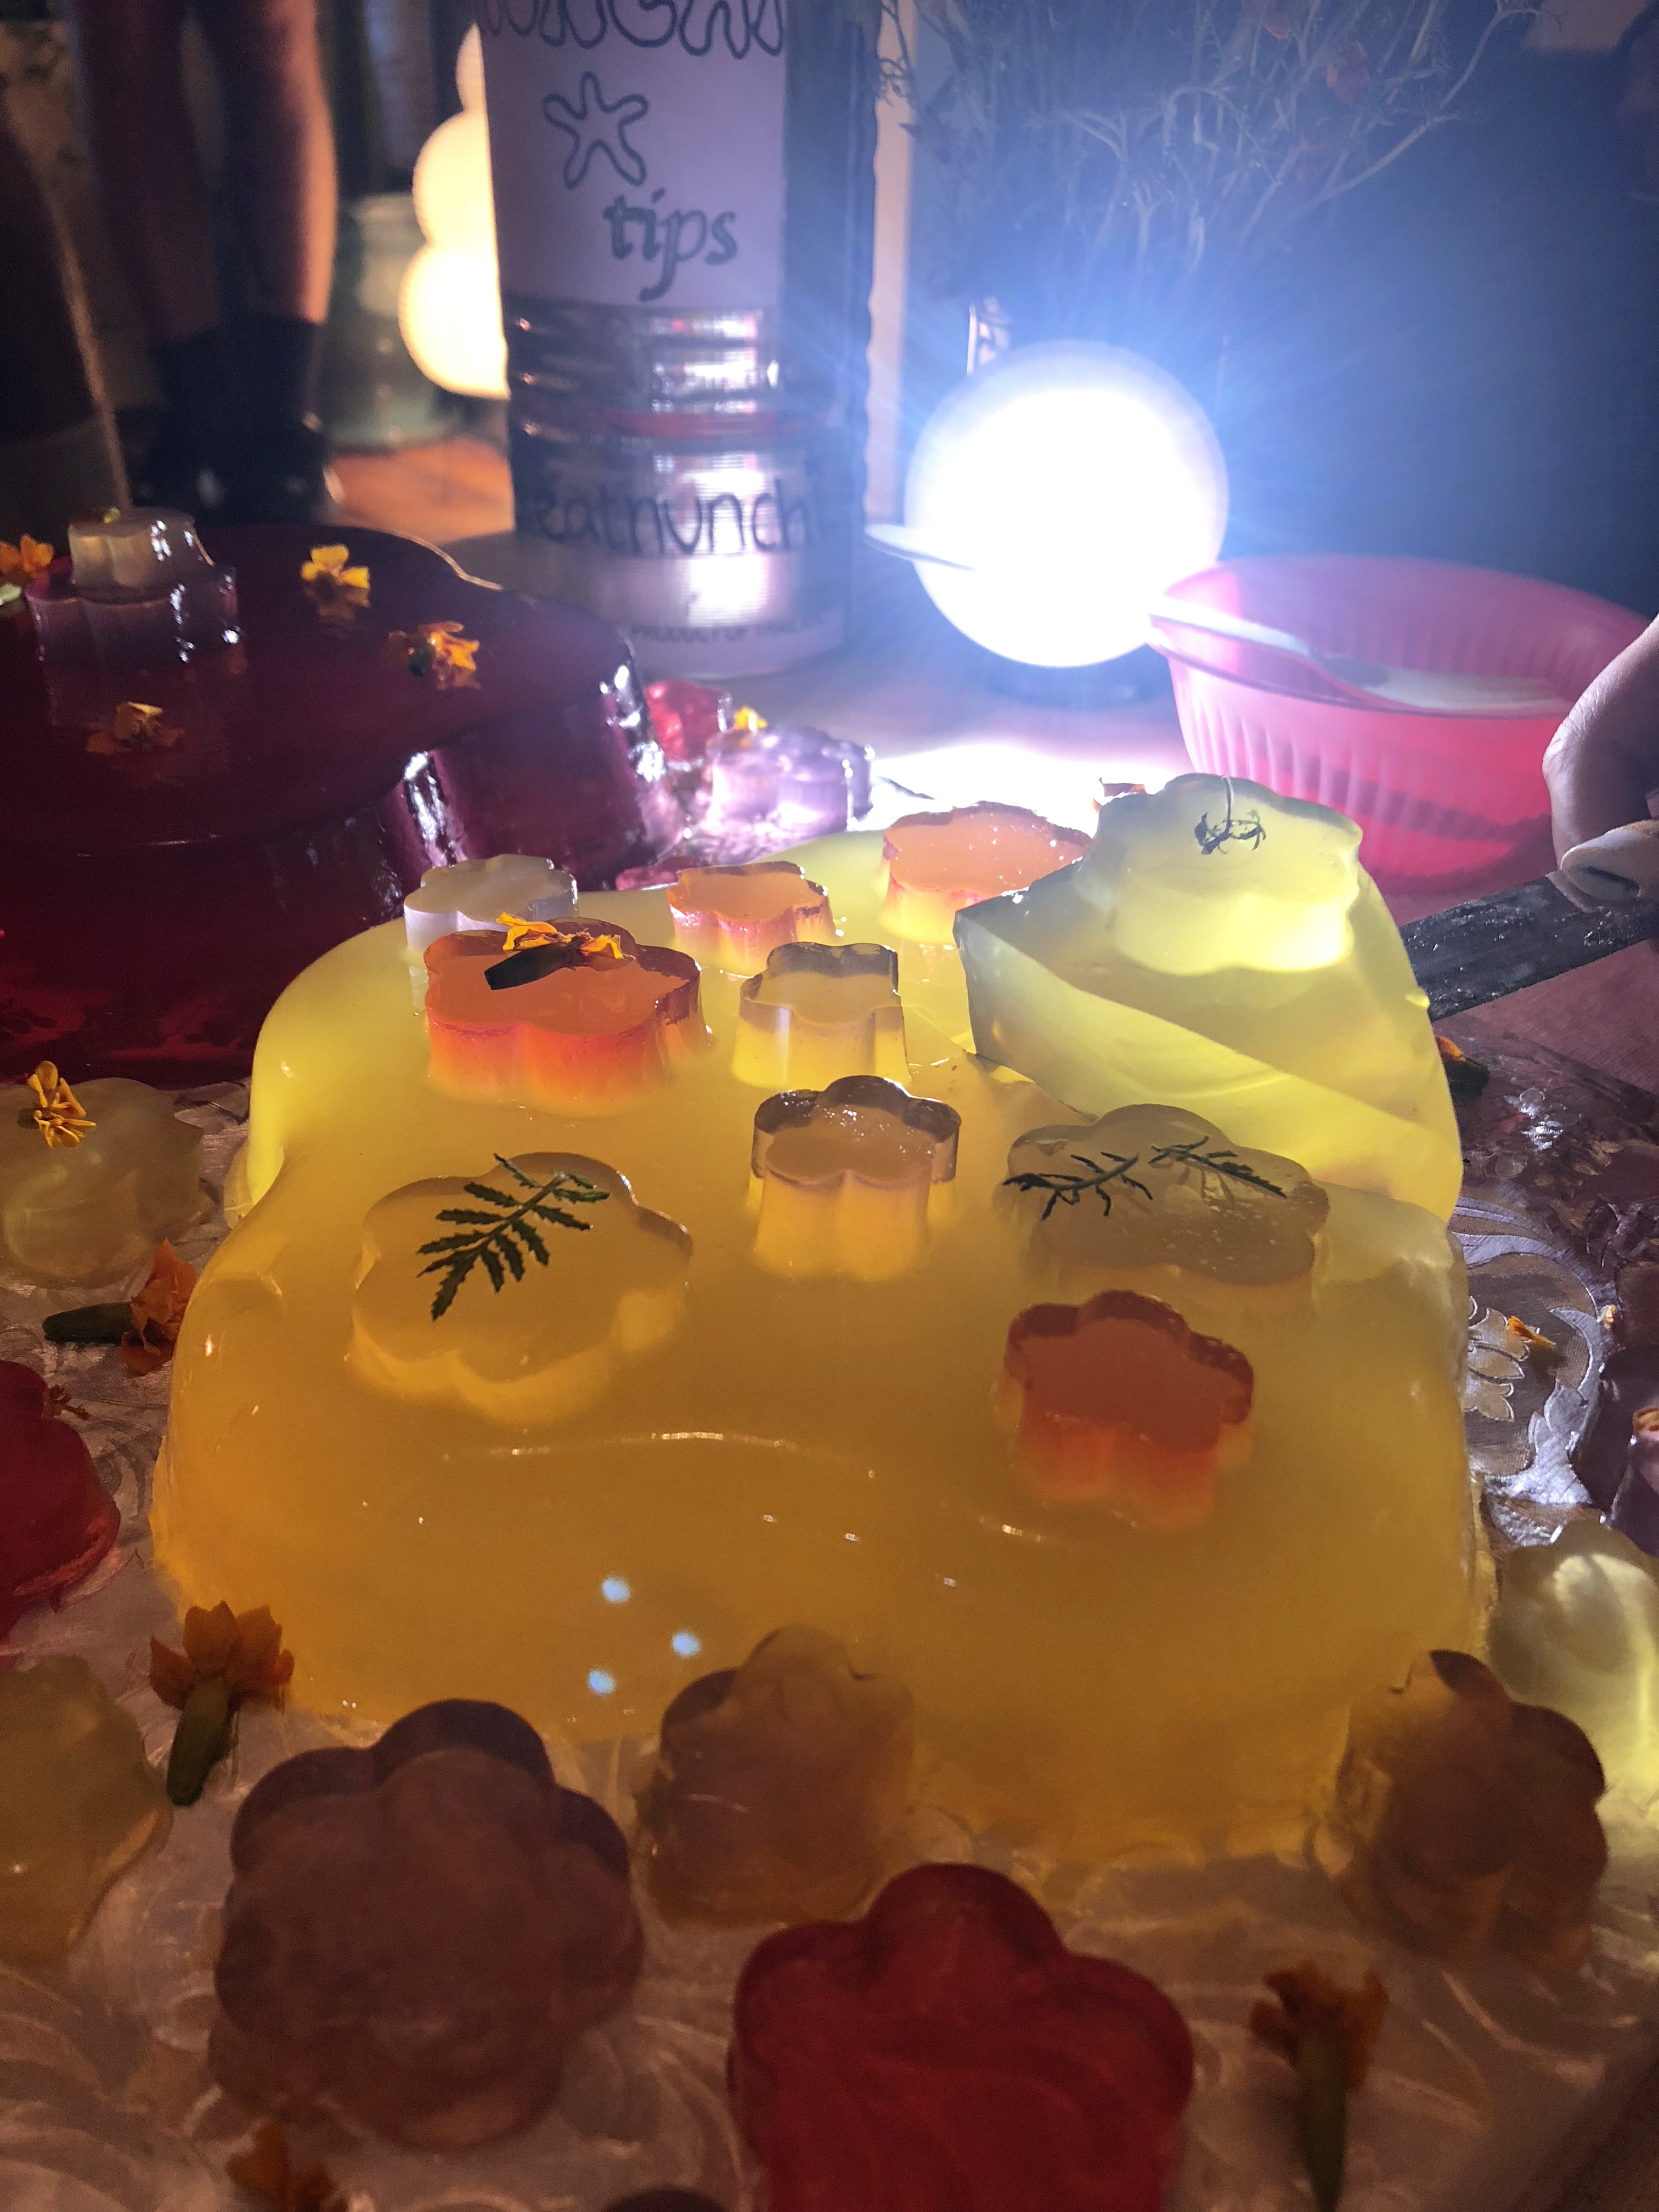 Detail of a brightly colored yellow jello cake in the shape of a flower illuminated by a flashlight on an alliuminium tray